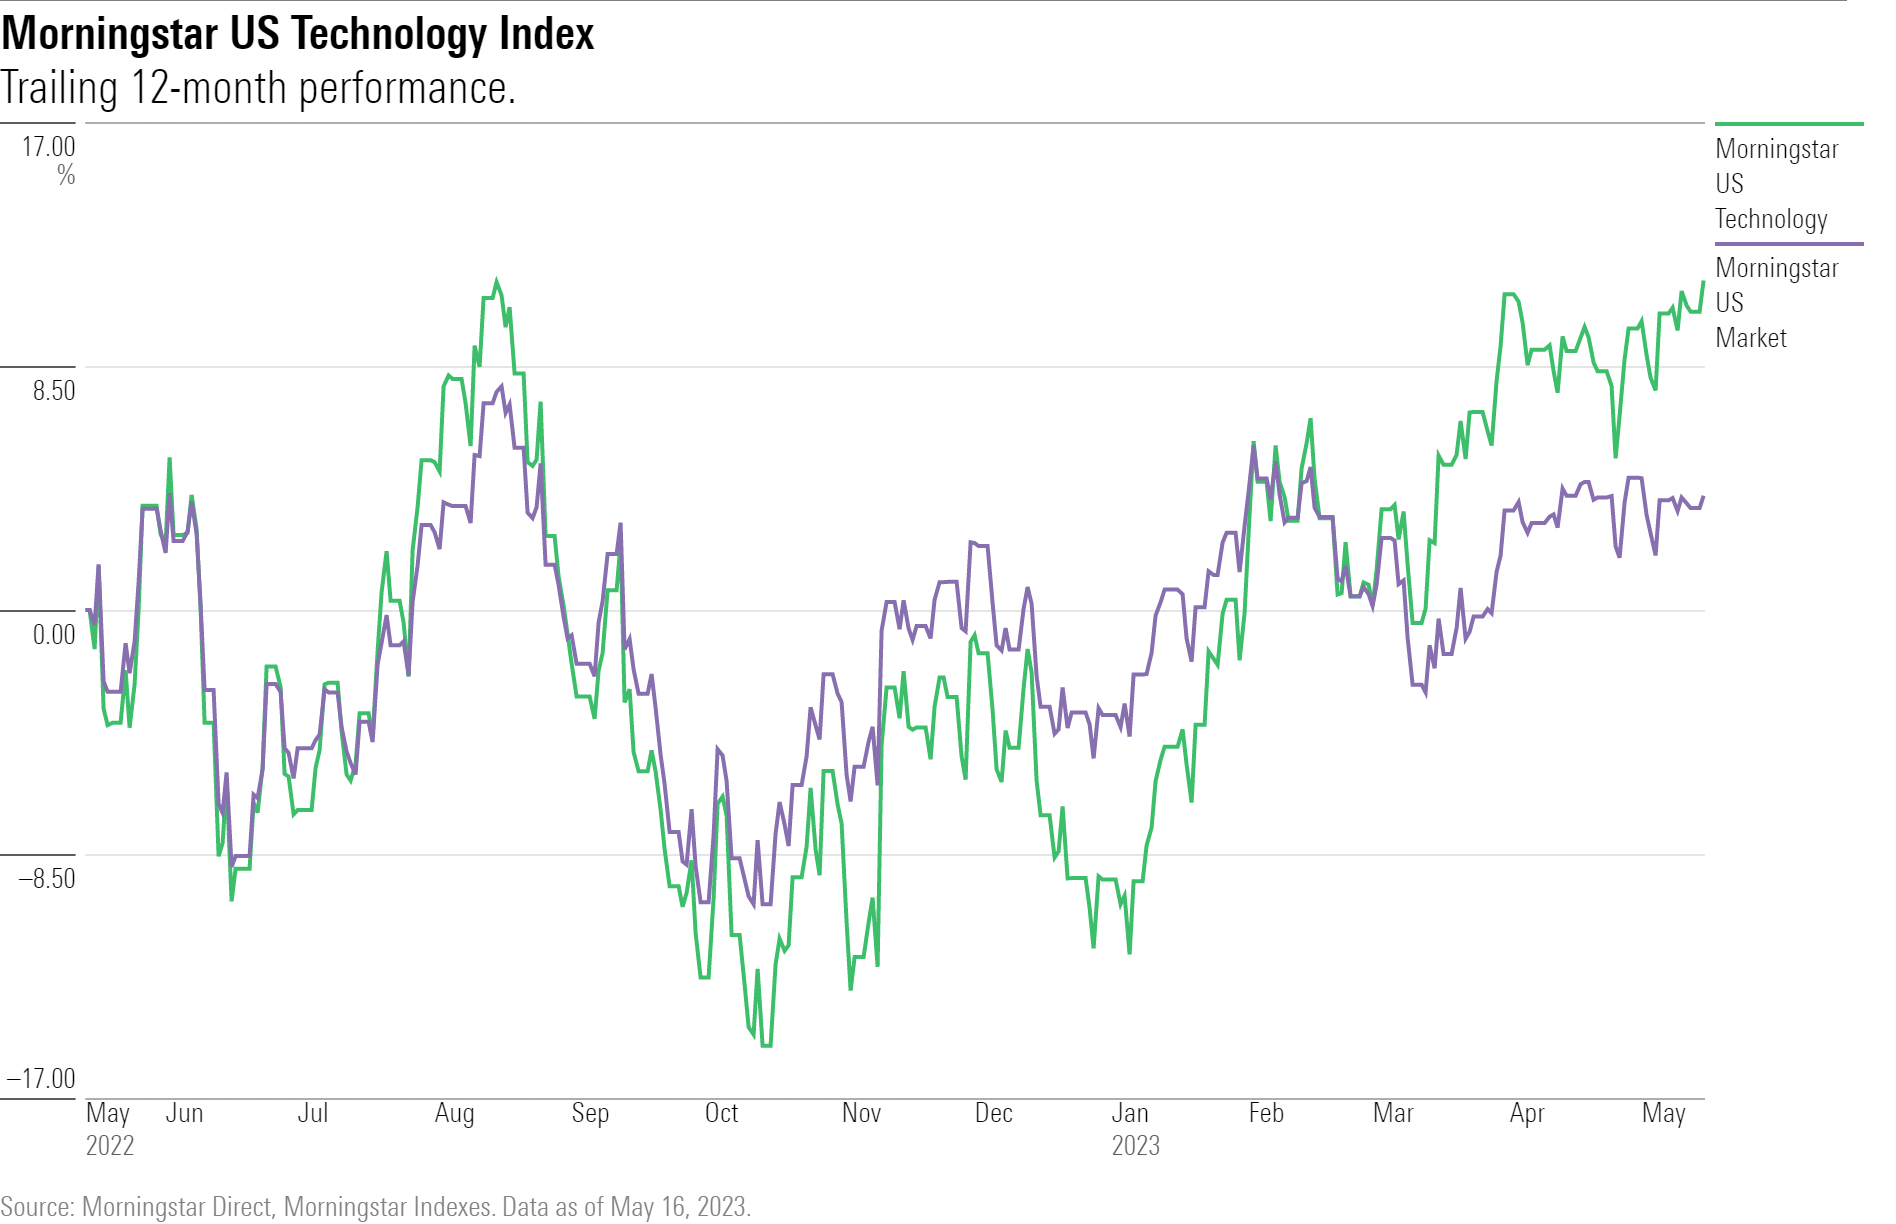 Line chart of the Morningstar US Technology Index trailing 12-month performance compared to the Morningstar US Market Index.